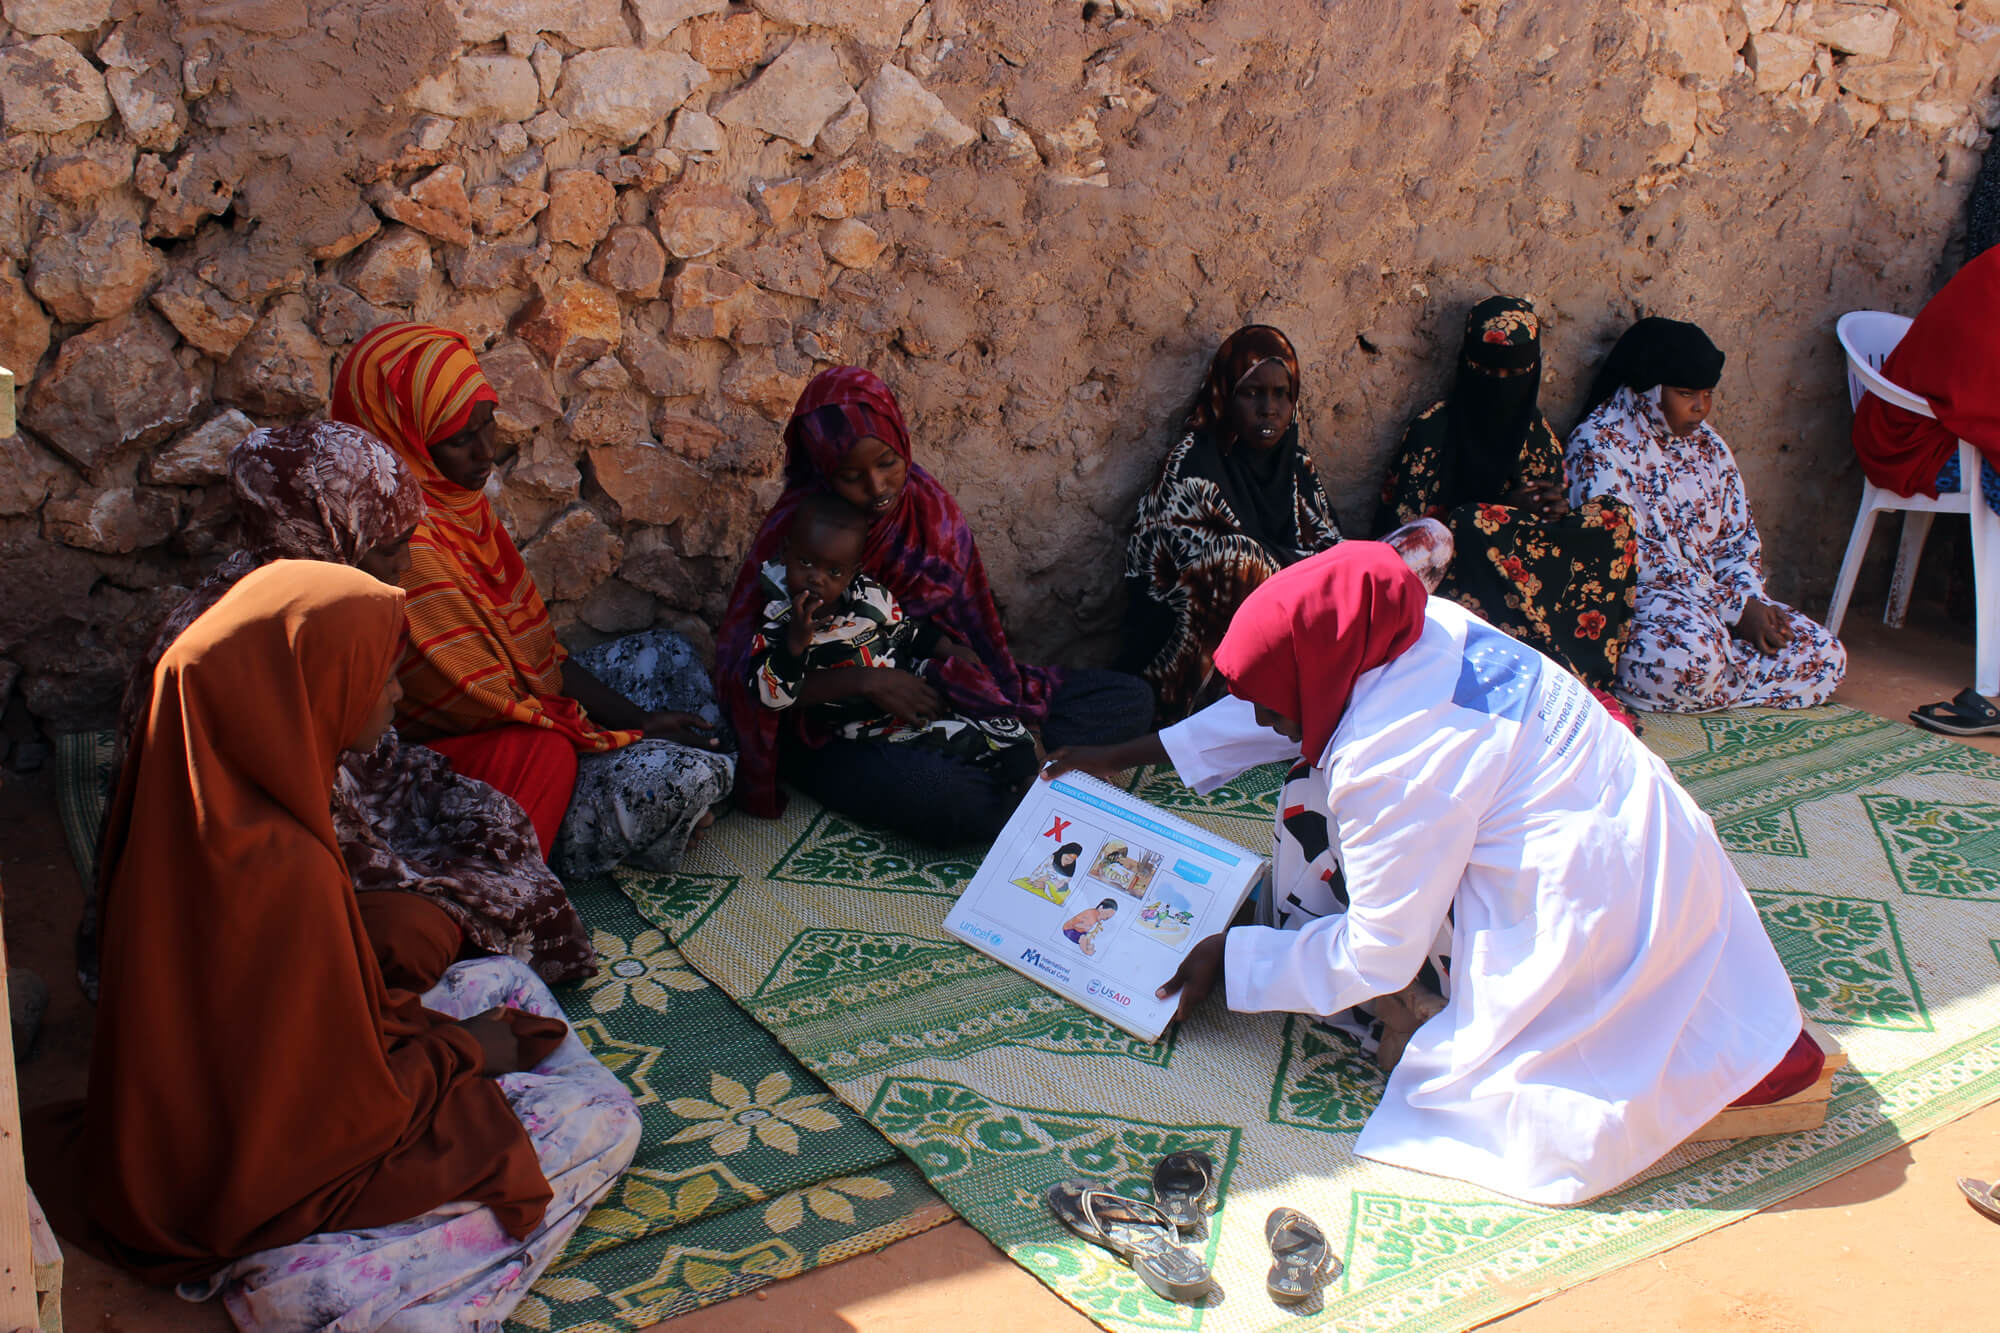 Caaisha Aabdi Mohammed works as an ECHO community health worker at the Garsor Village.